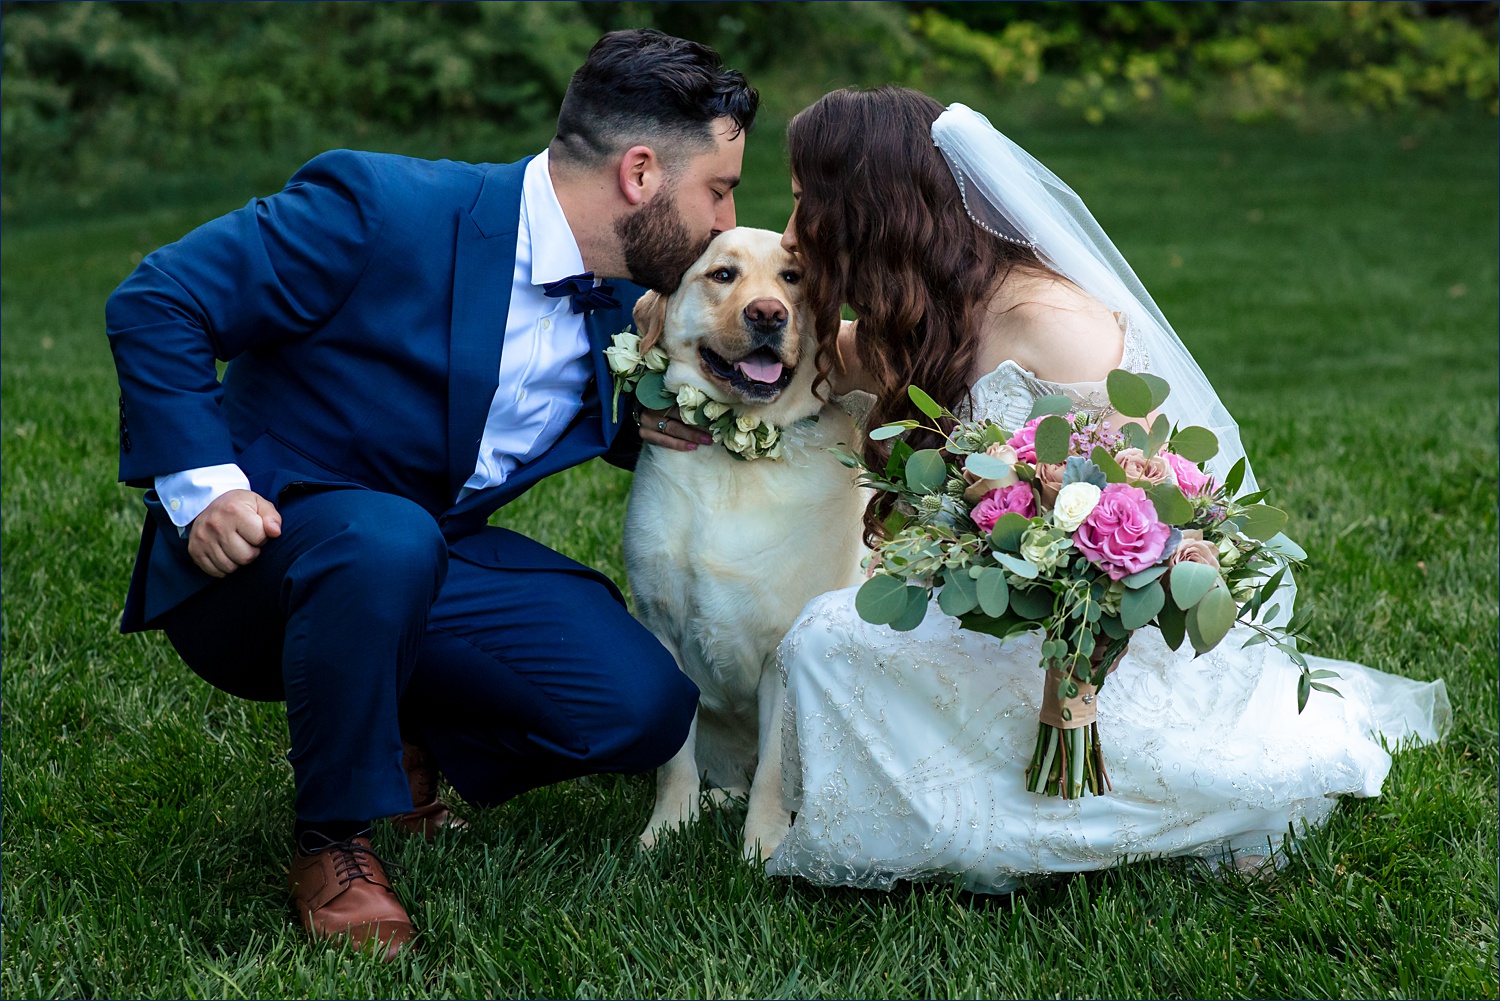 The bride, groom and their beloved dog